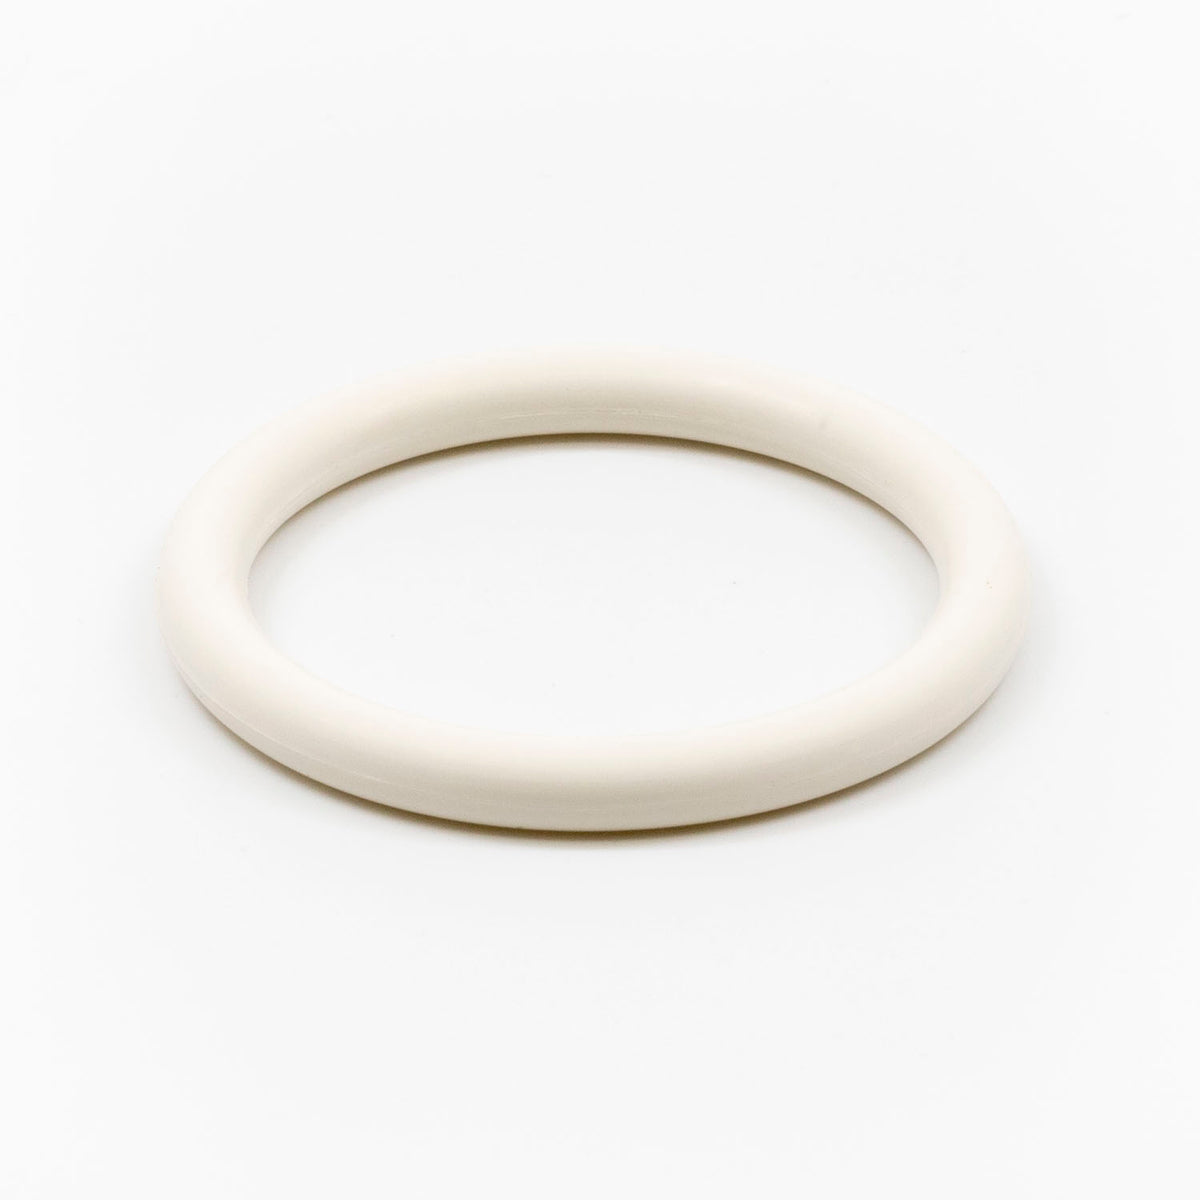 Oring - White - for Mouthpiece or Core